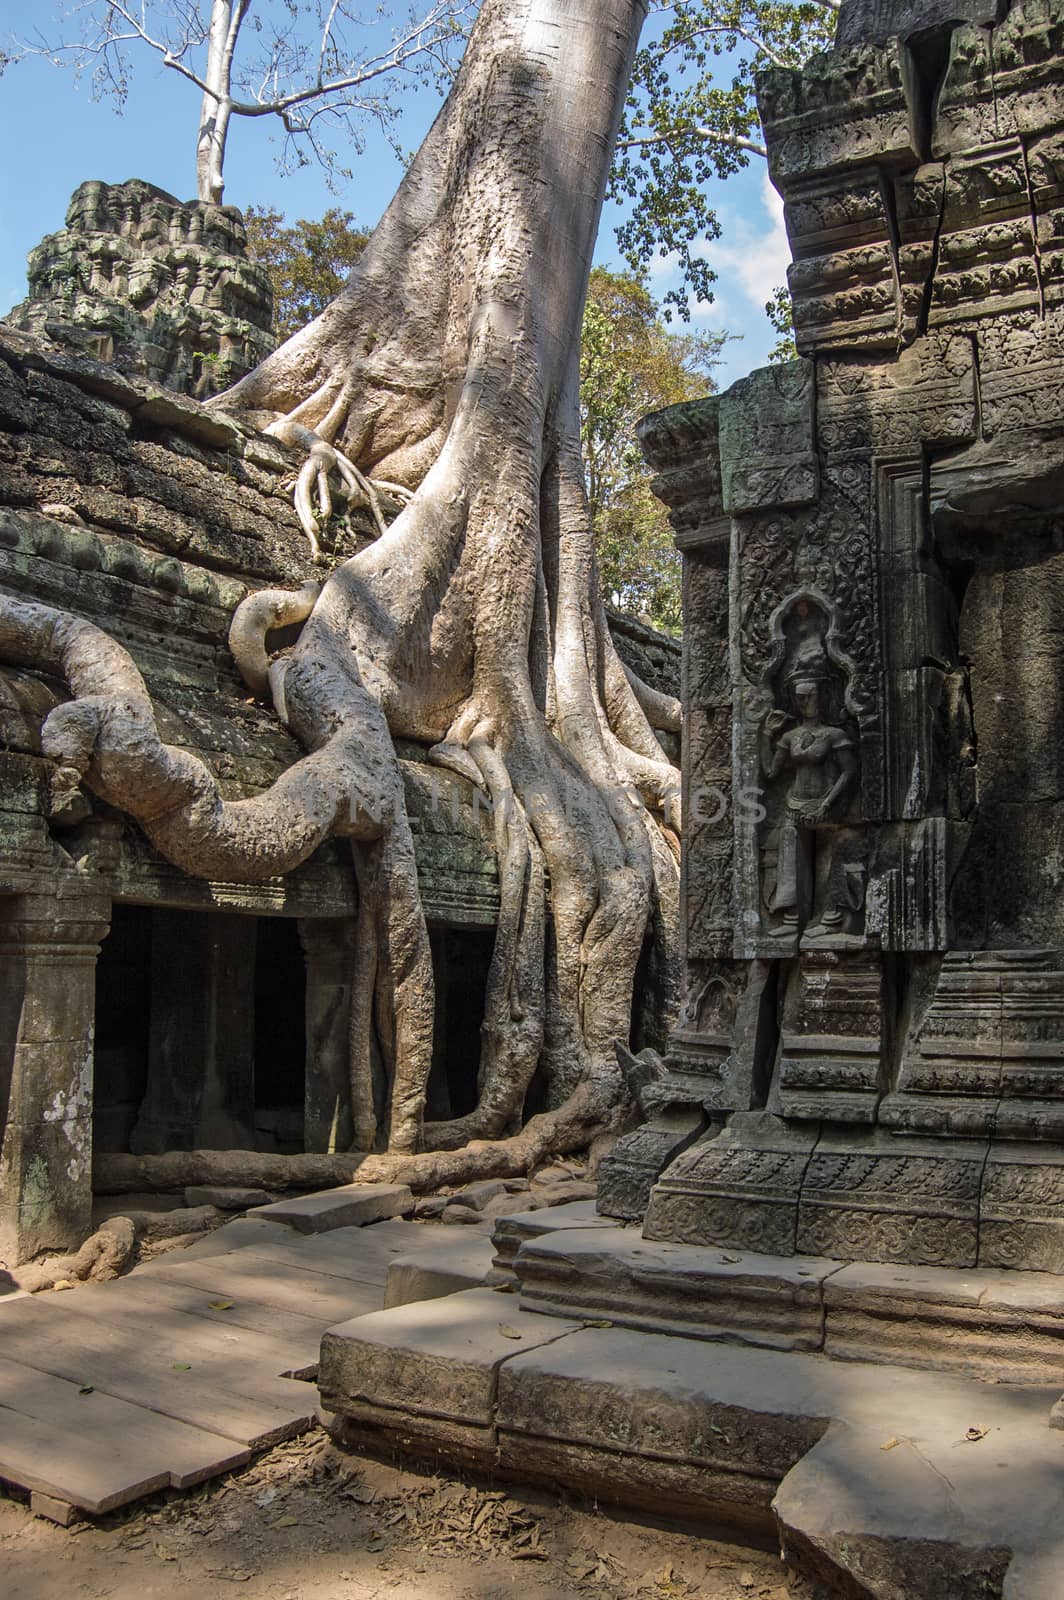 Ancient Khmer temple of Ta Prohm, overgrown with Kapok trees (latin name Ceiba pentandra). Part of the Angkor complex in Siem Reap province, Cambodia.